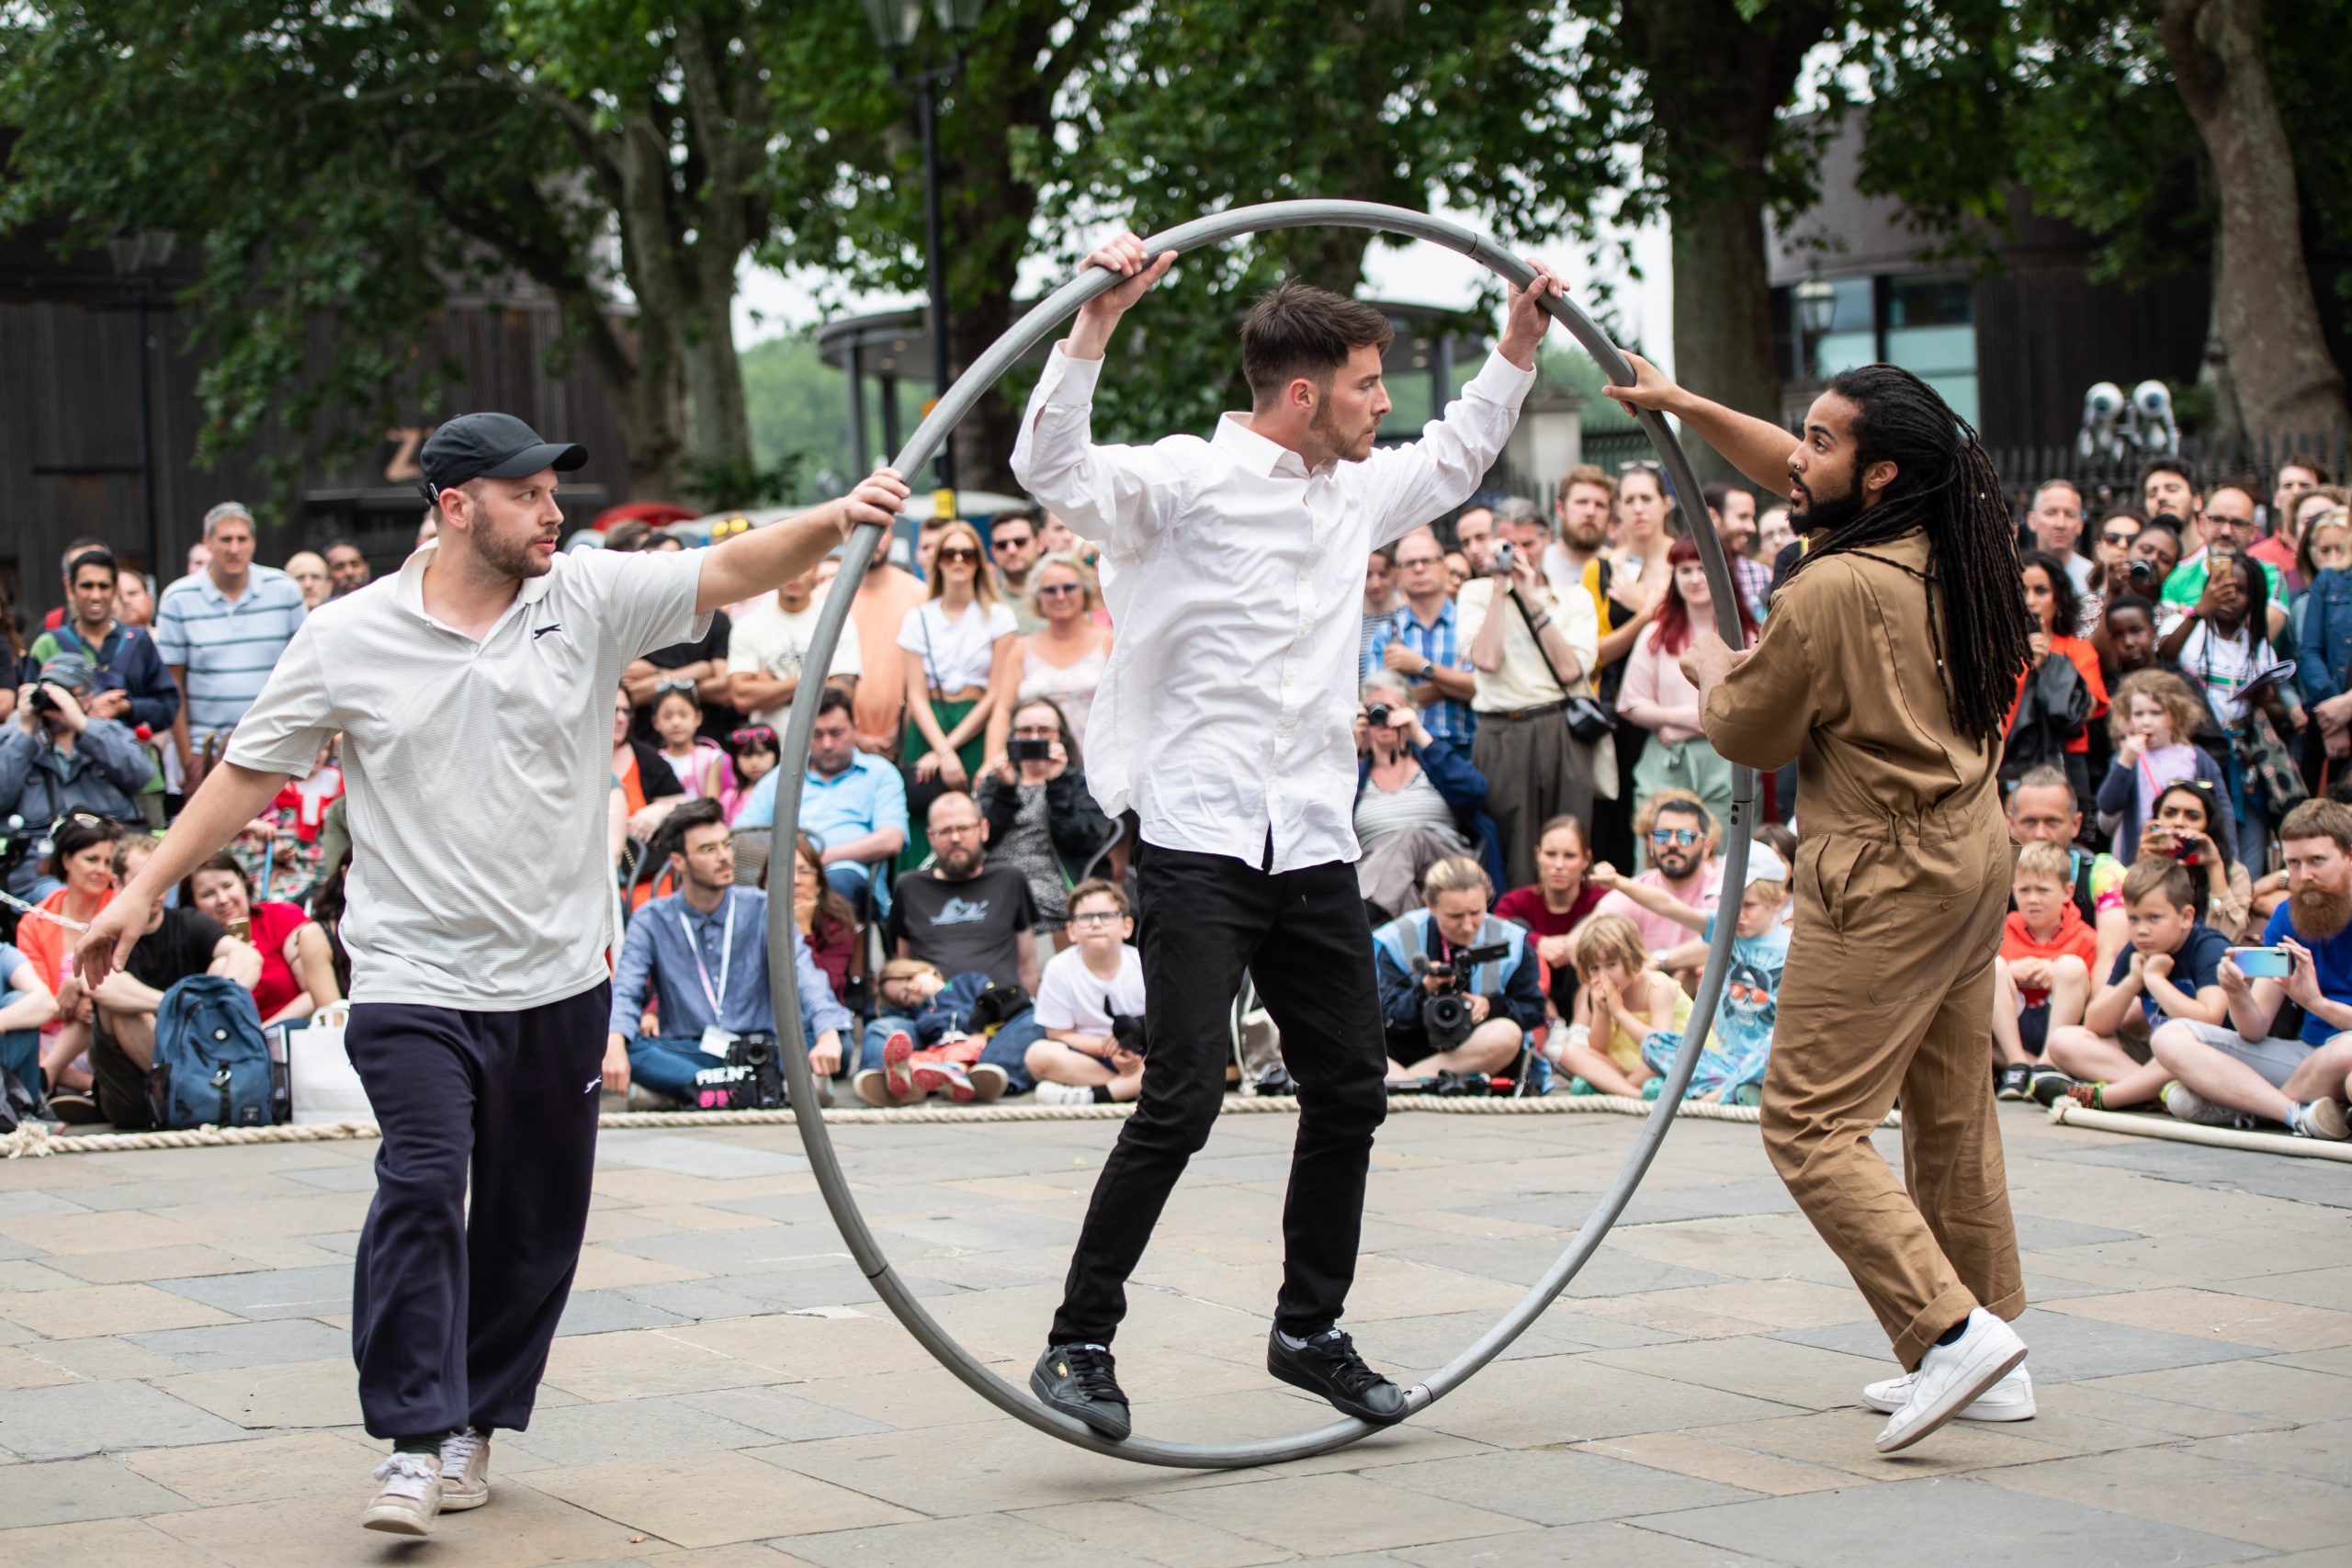 Simple Cypher. Two performers hold a large hoop or cyr wheel with one performer balanced inside